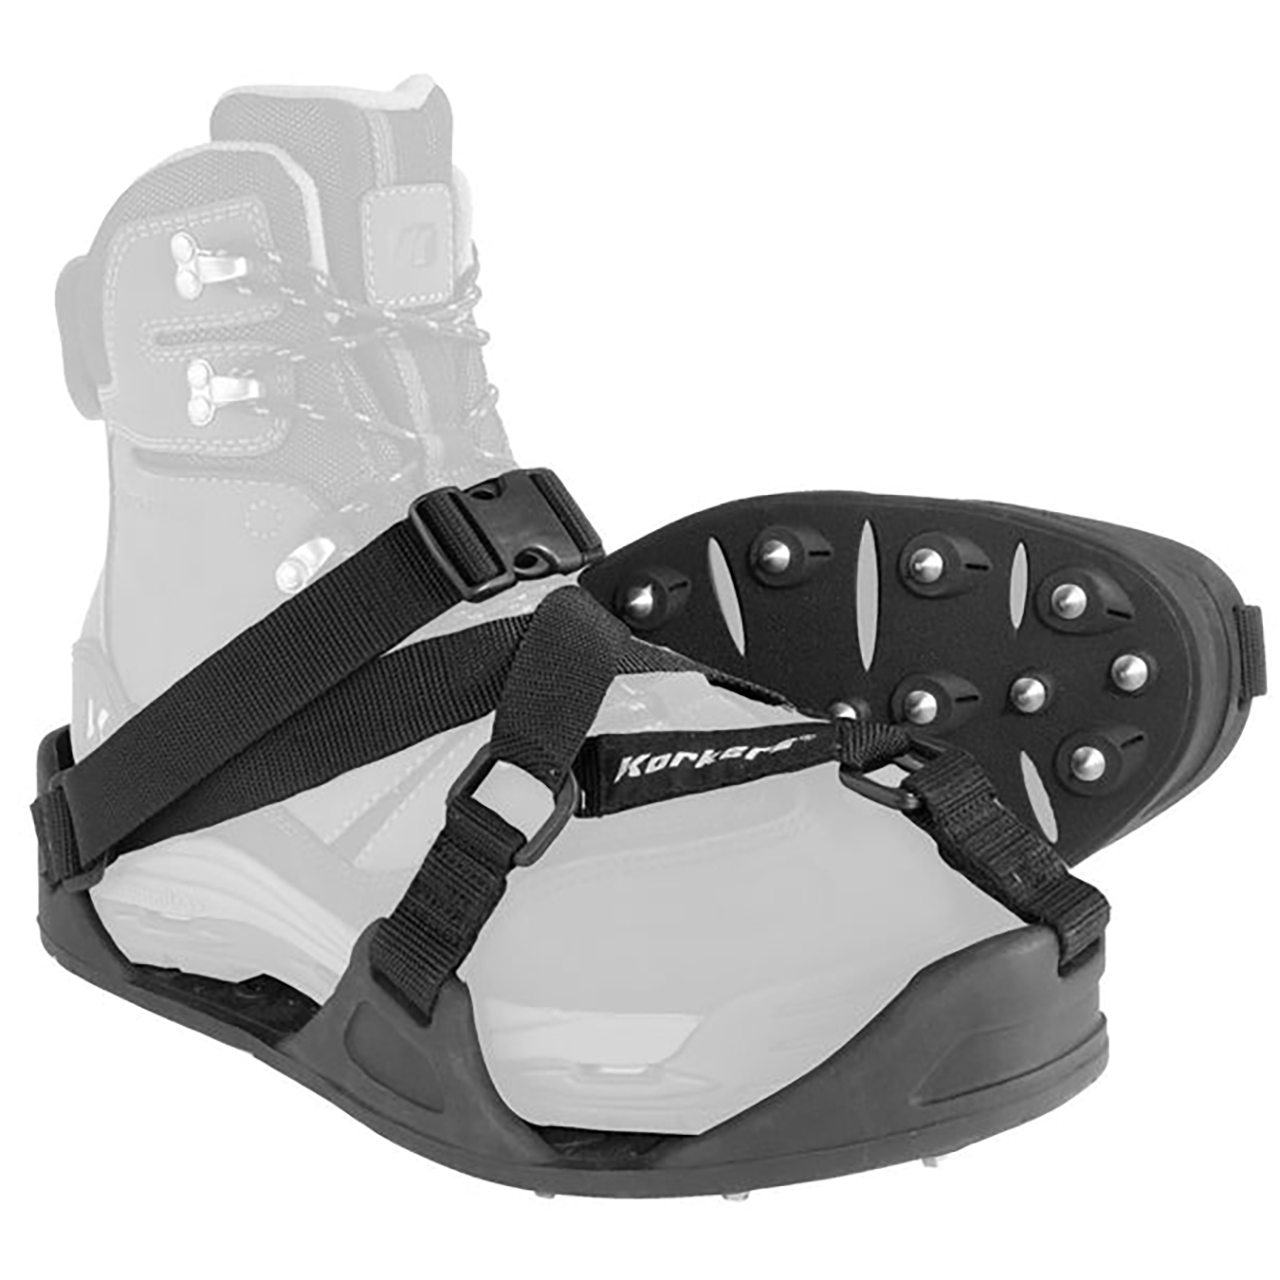 Korkers Extreme Ice Cleats XL